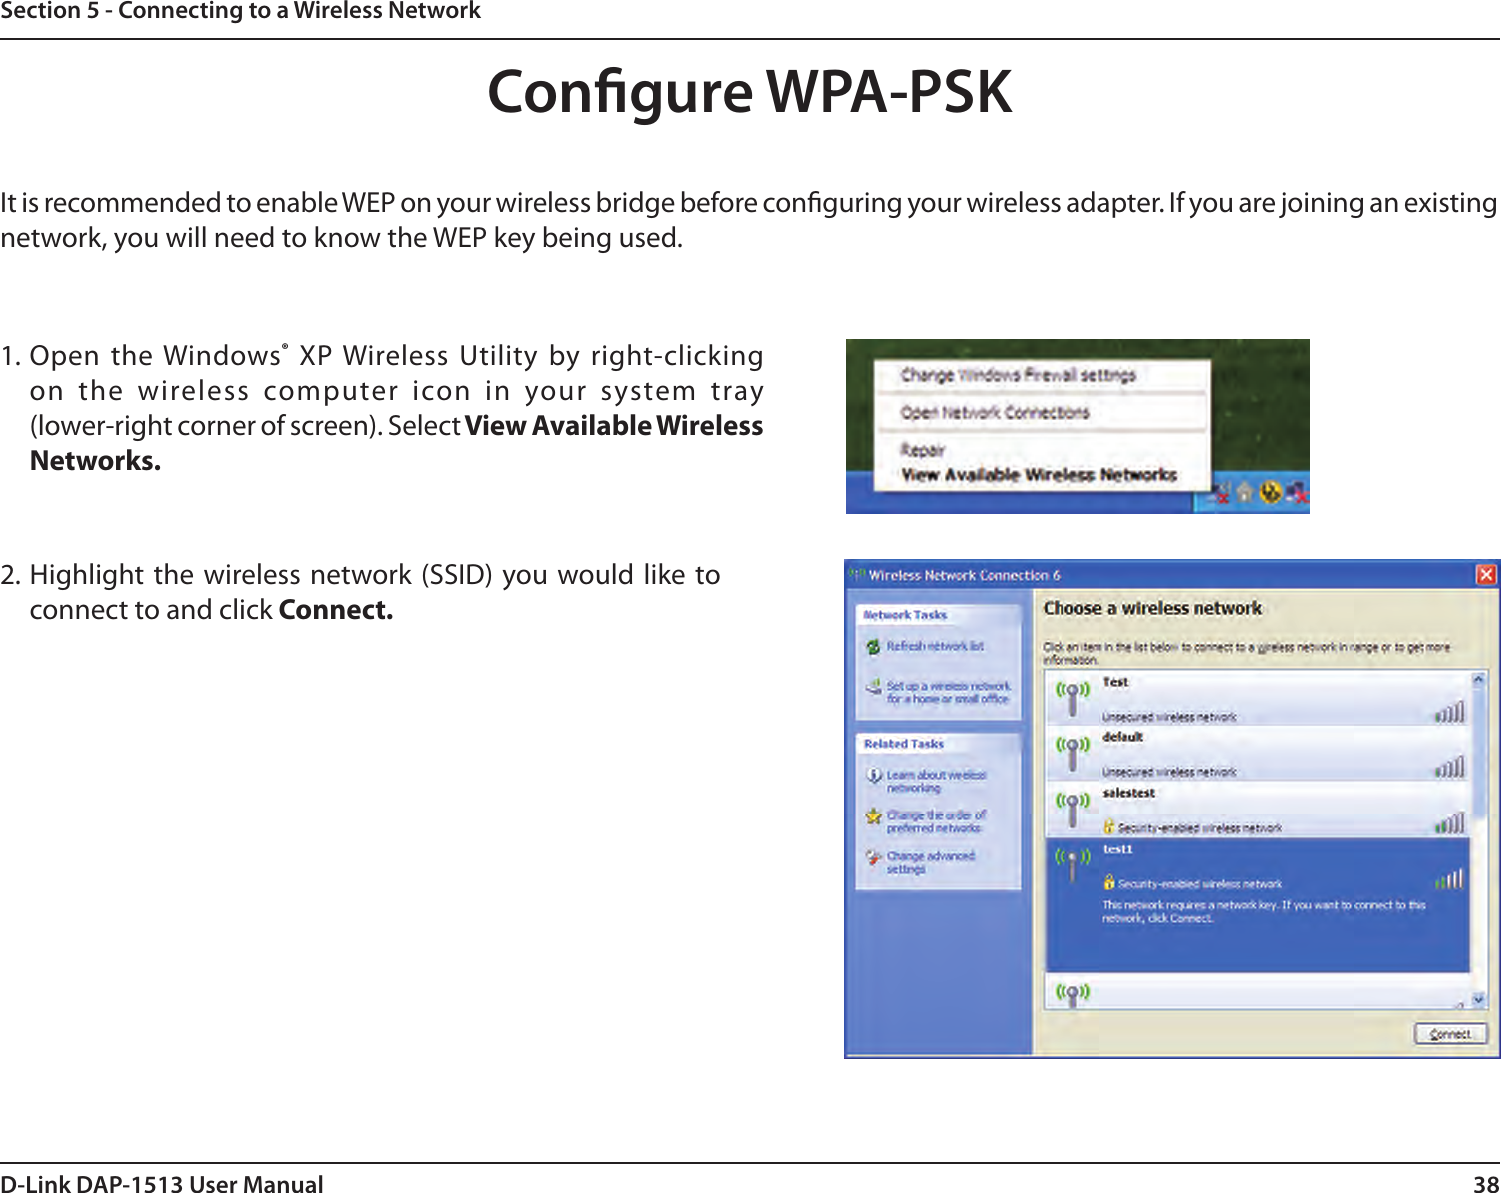 38D-Link DAP-1513 User ManualSection 5 - Connecting to a Wireless NetworkCongure WPA-PSKIt is recommended to enable WEP on your wireless bridge before conguring your wireless adapter. If you are joining an existing network, you will need to know the WEP key being used.2. Highlight the  wireless network (SSID) you would like to connect to and click Connect.1. Open  the Windows® XP Wireless Utility by right-clicking on  the  wireless  computer  icon  in  your  system  tray  (lower-right corner of screen). Select View Available Wireless Networks. 